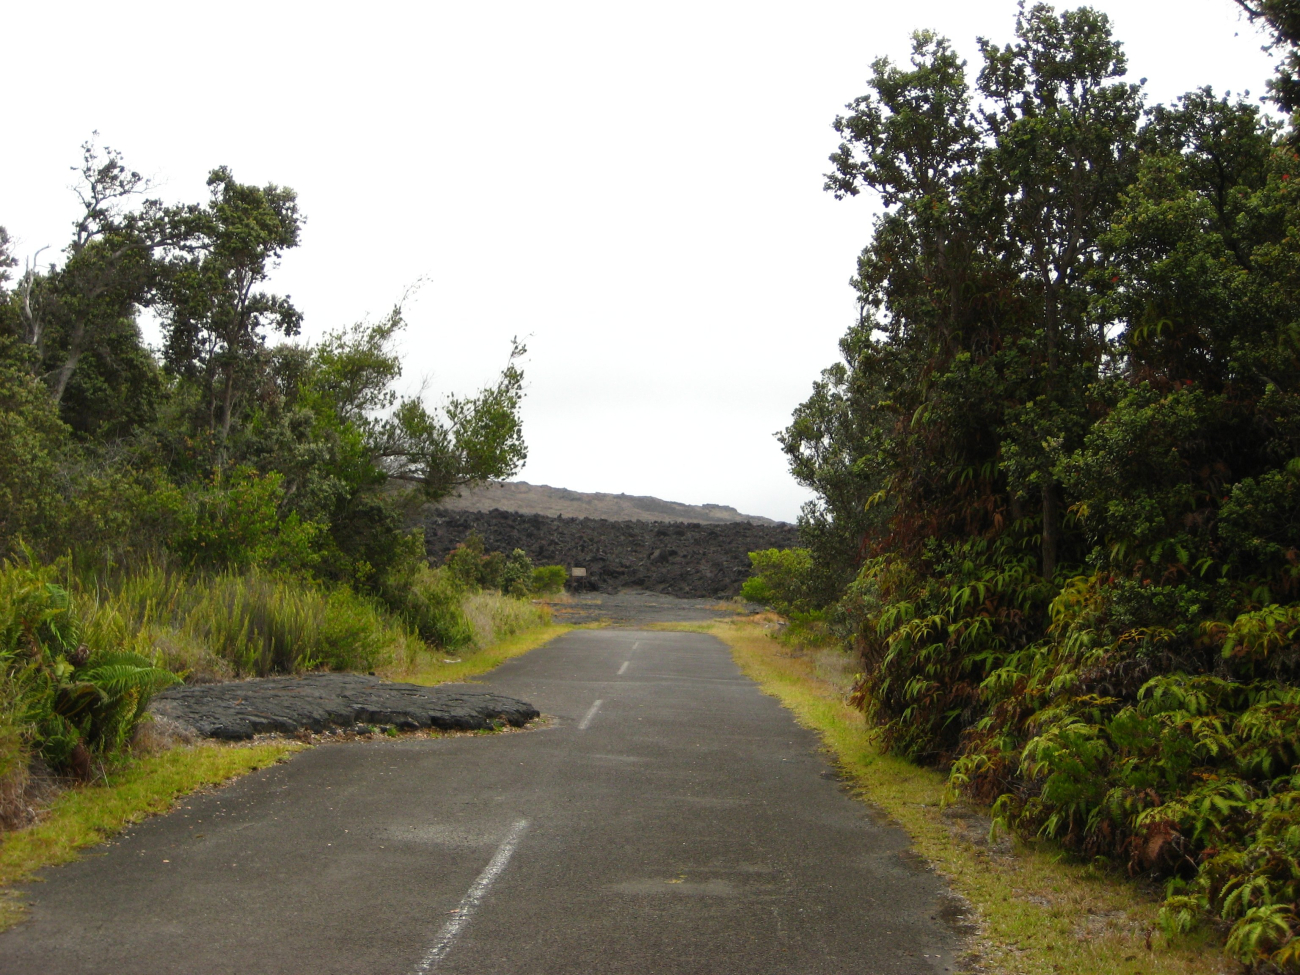 Looking up the now dead end road to the aa lava flow of January 1974